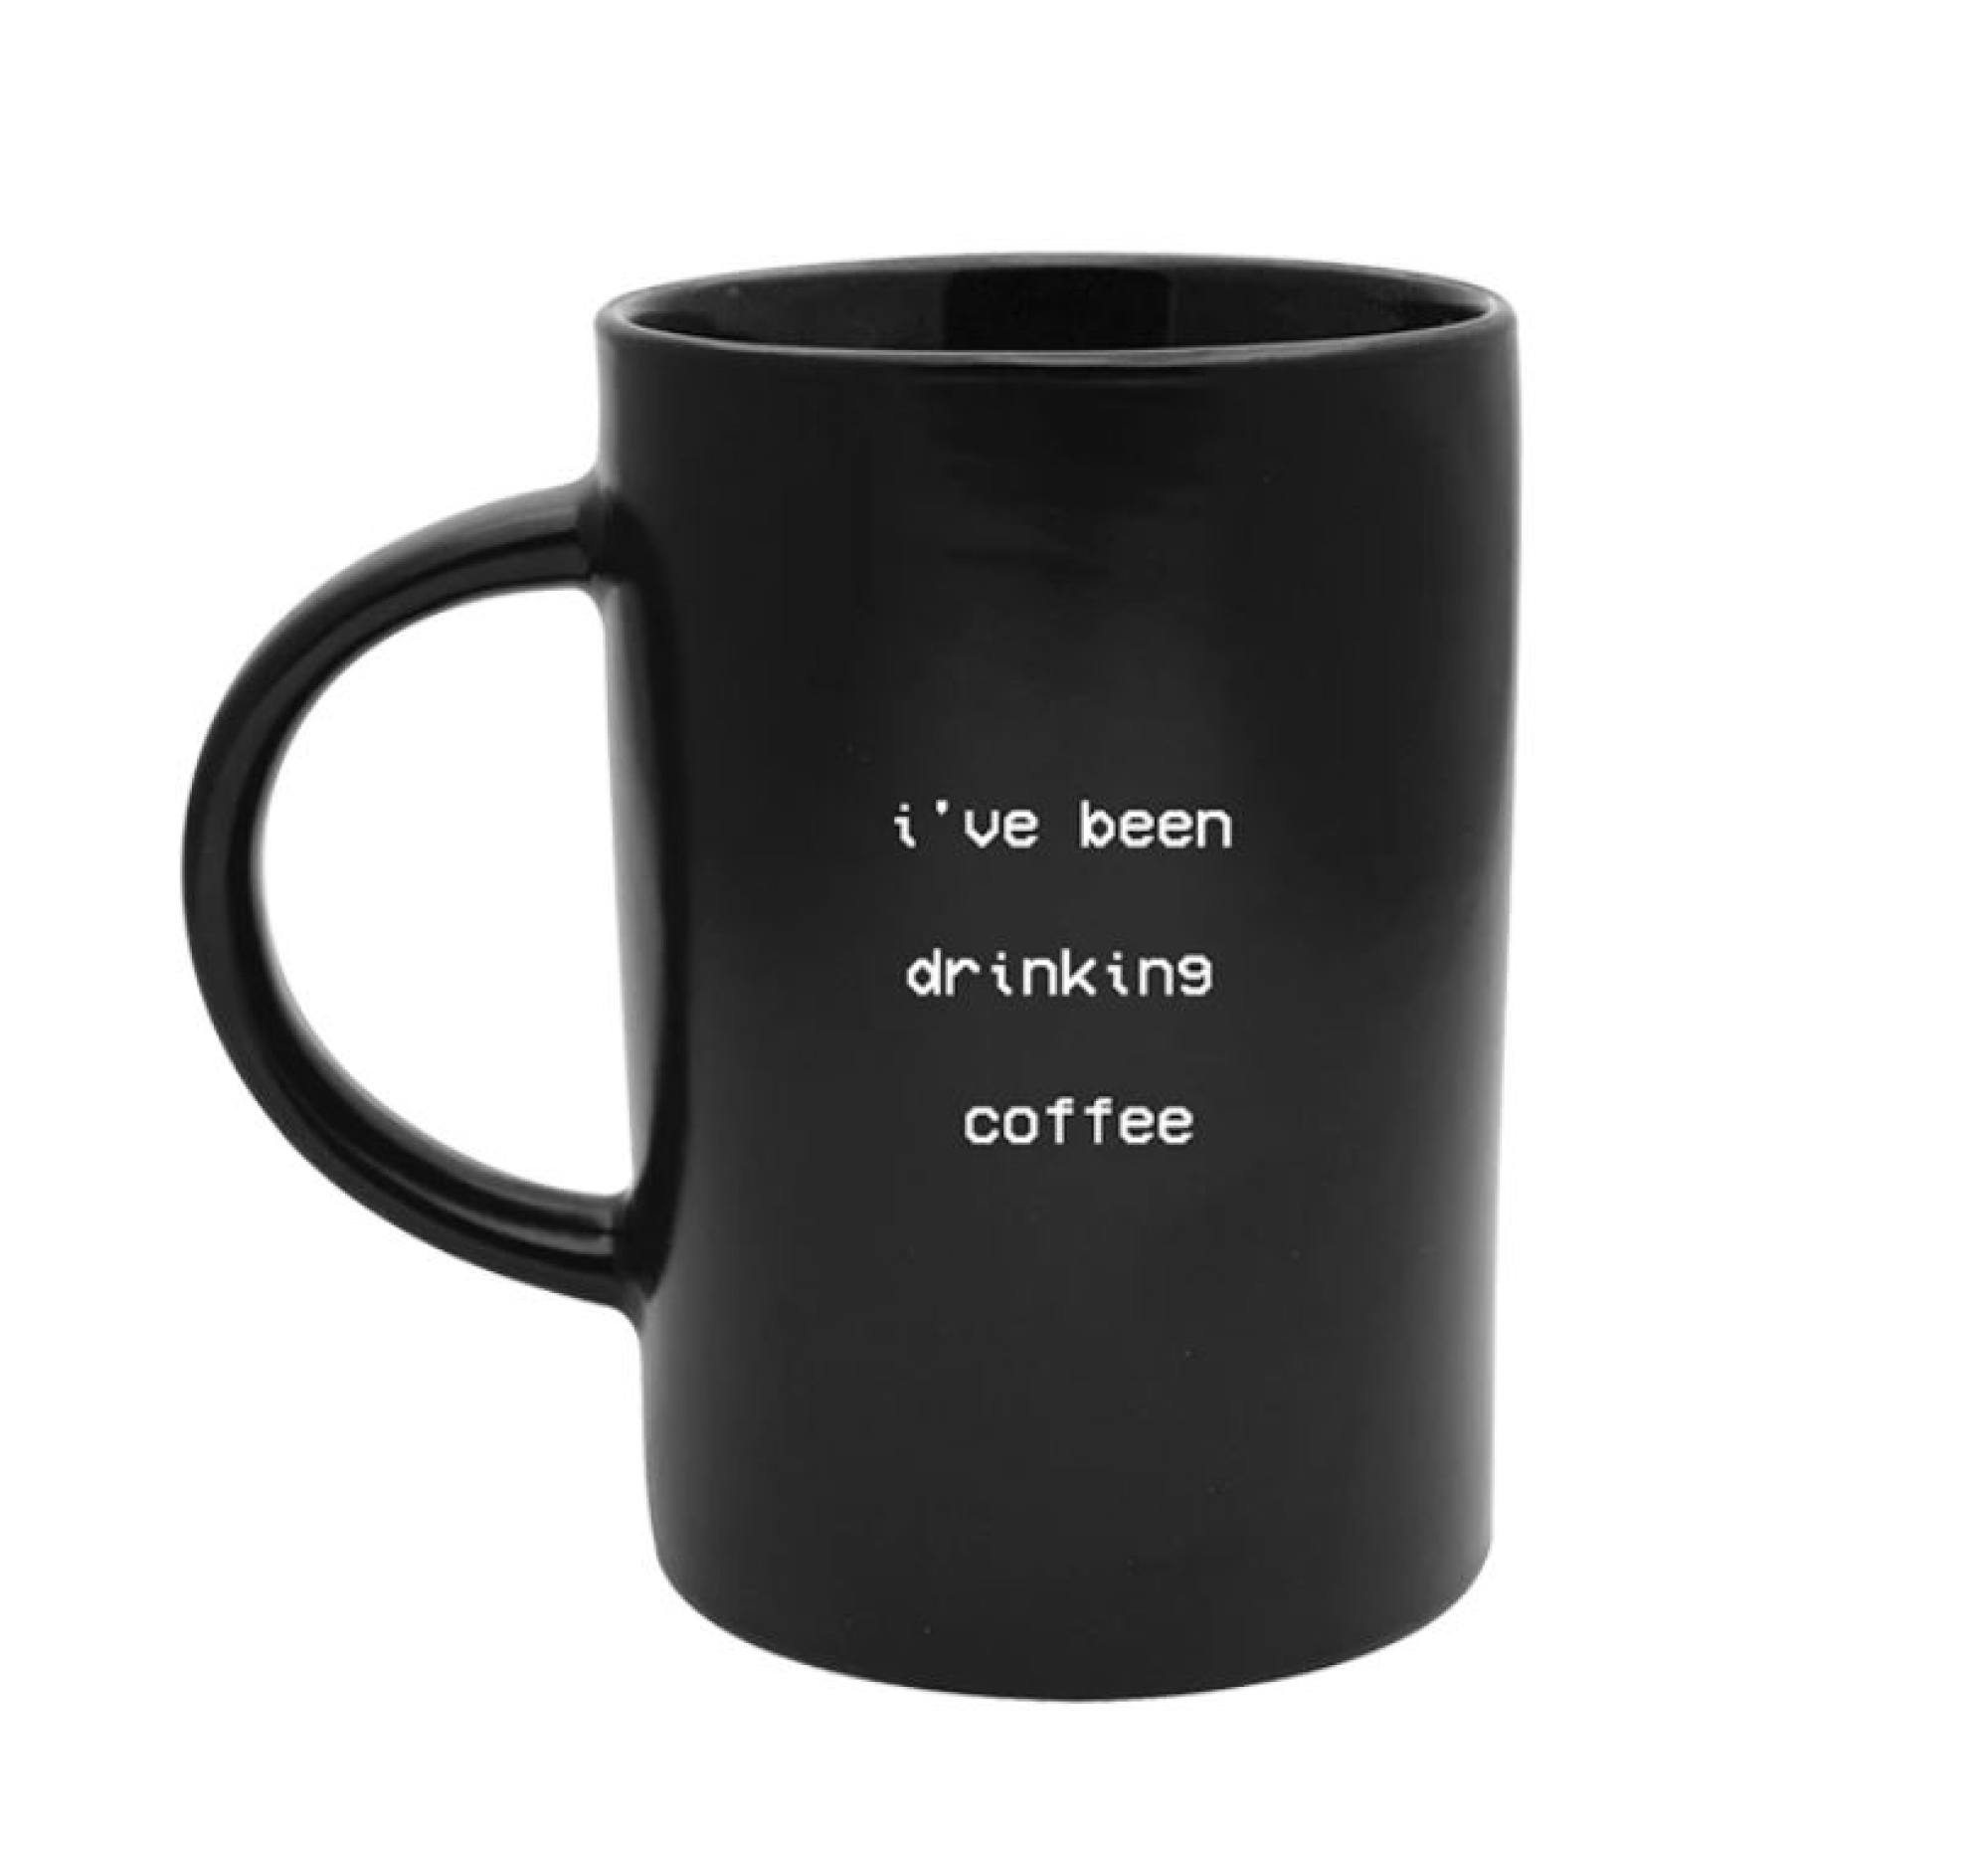 The “Been Drinking Coffee” mug from Ariana Grande’s merchandise website. Photo: shop.arianagrande.com